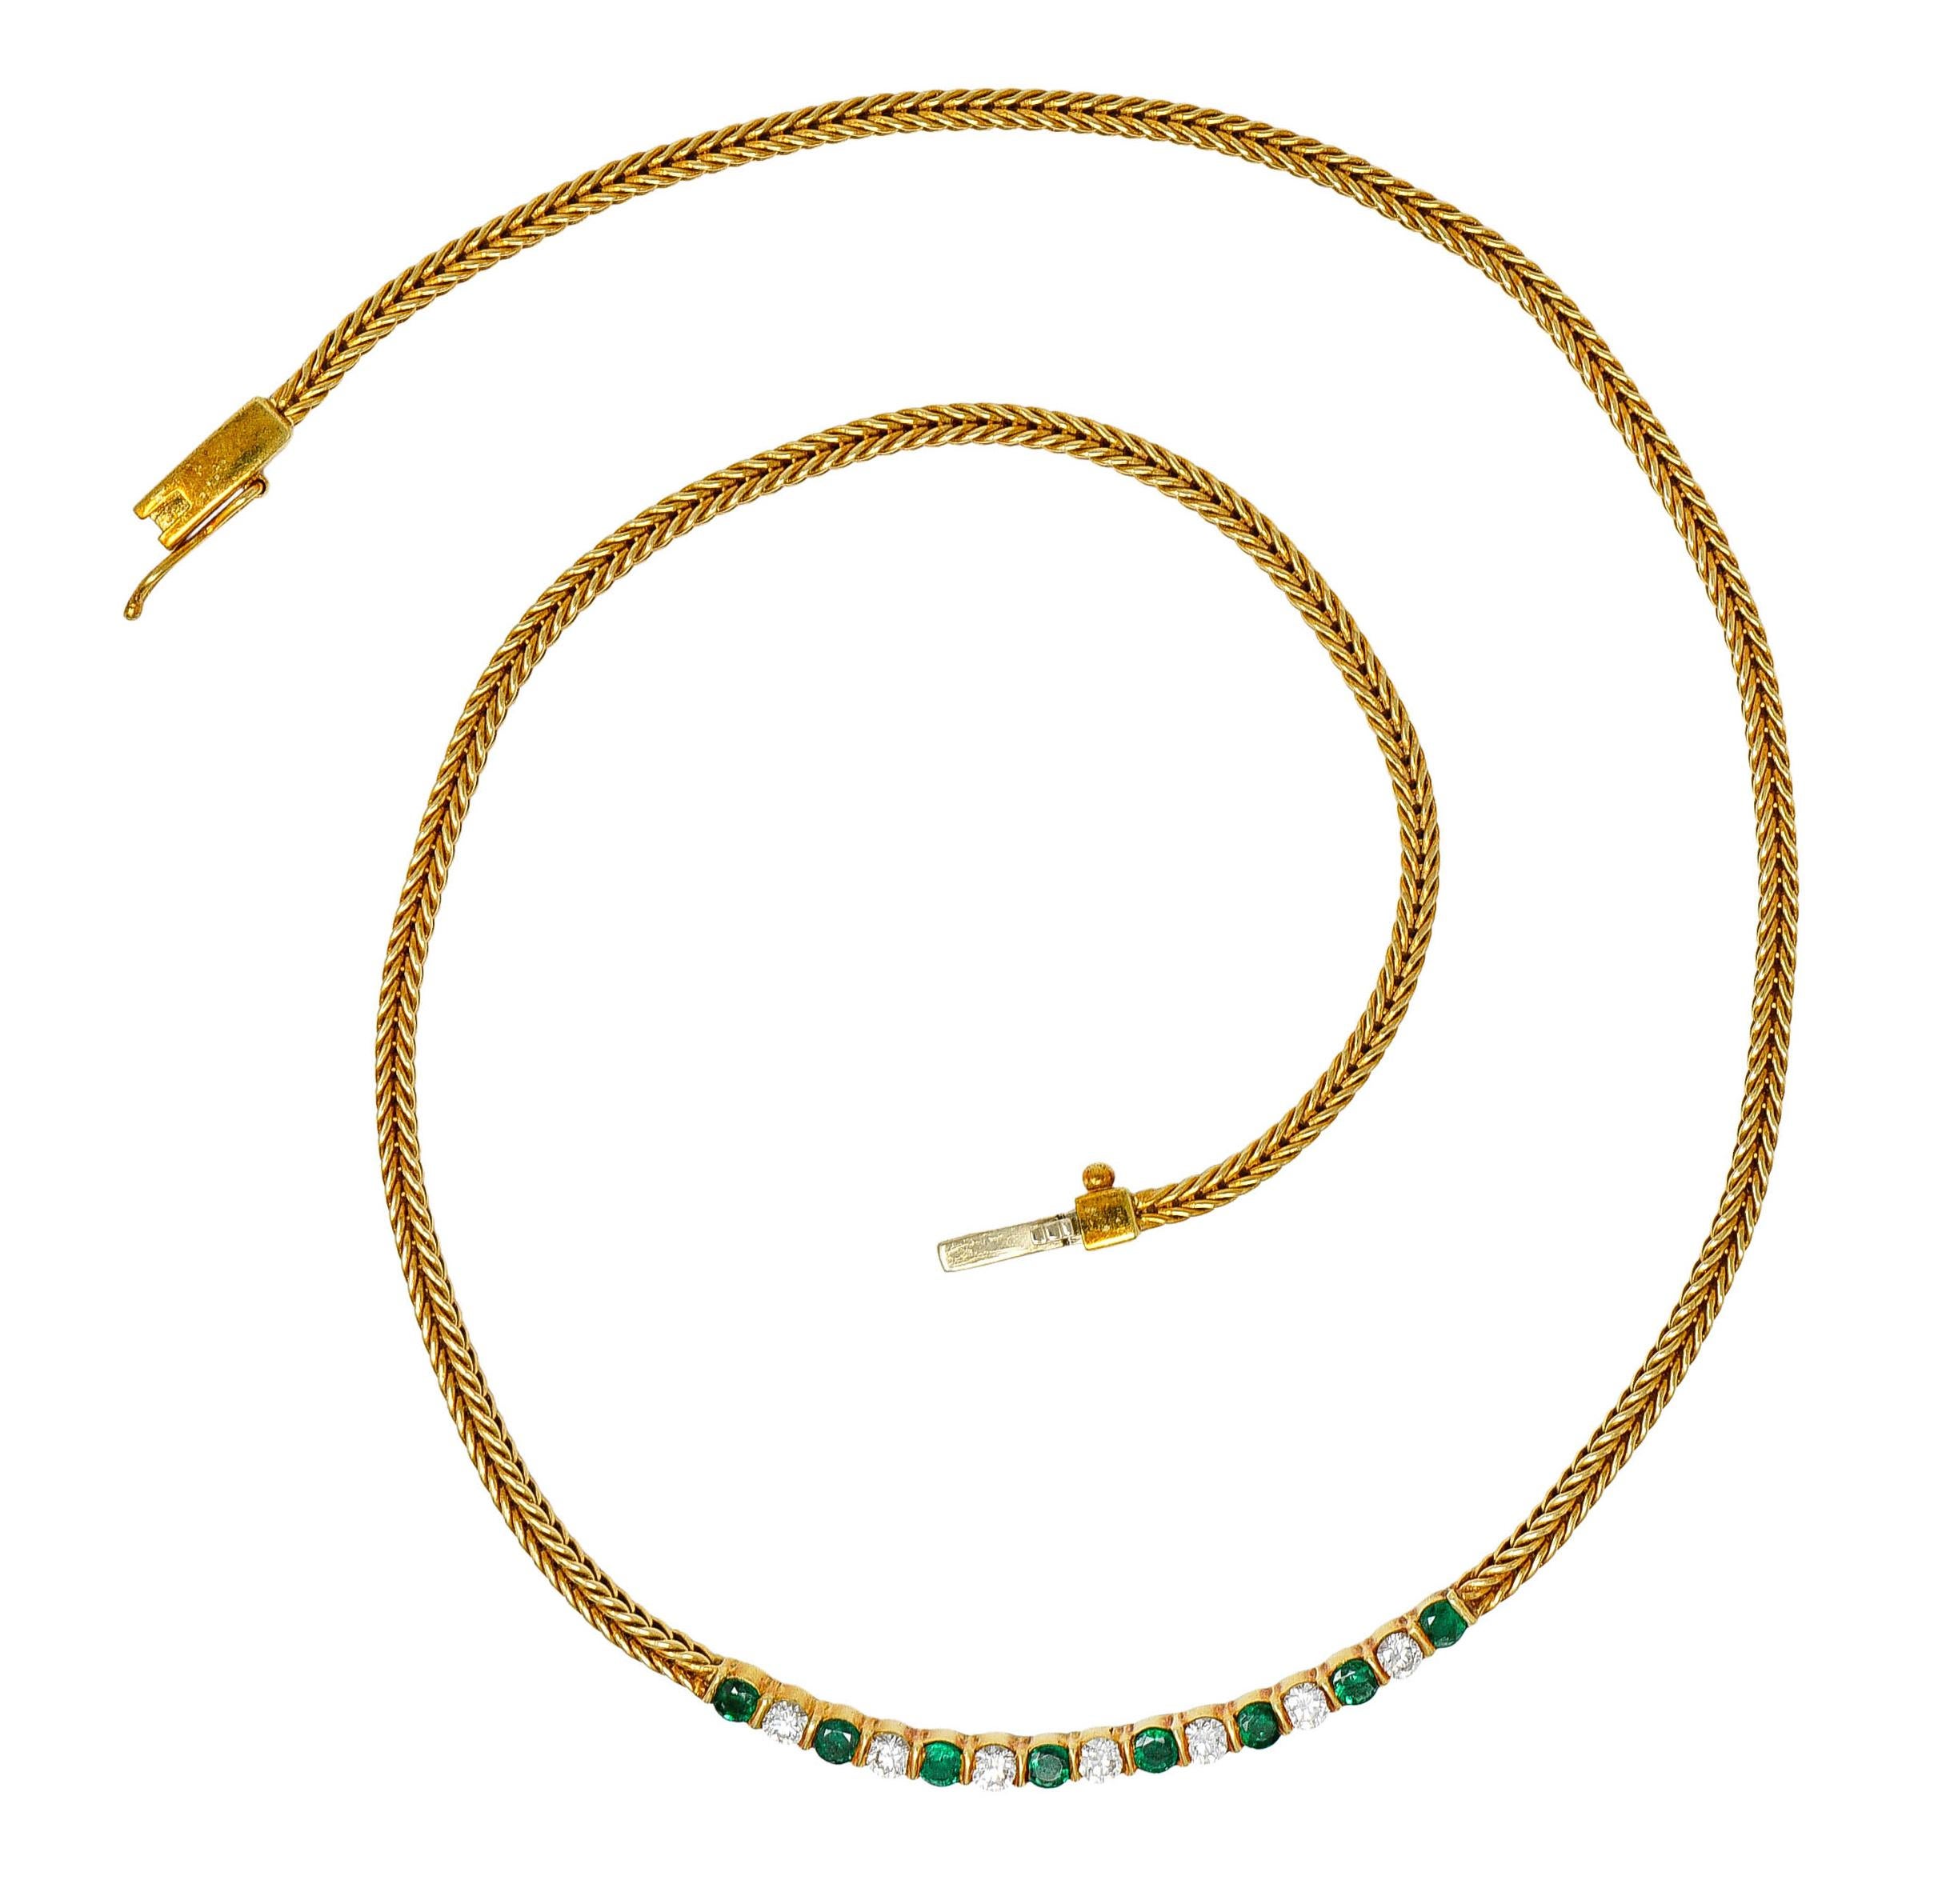 Necklace designed as a finely braided wheat chain necklace

With a central bar station featuring round cut emeralds and round brilliant cut diamonds

Emeralds are a well-matched vivid green in color while weighing approximately 1.00 carat

Diamonds